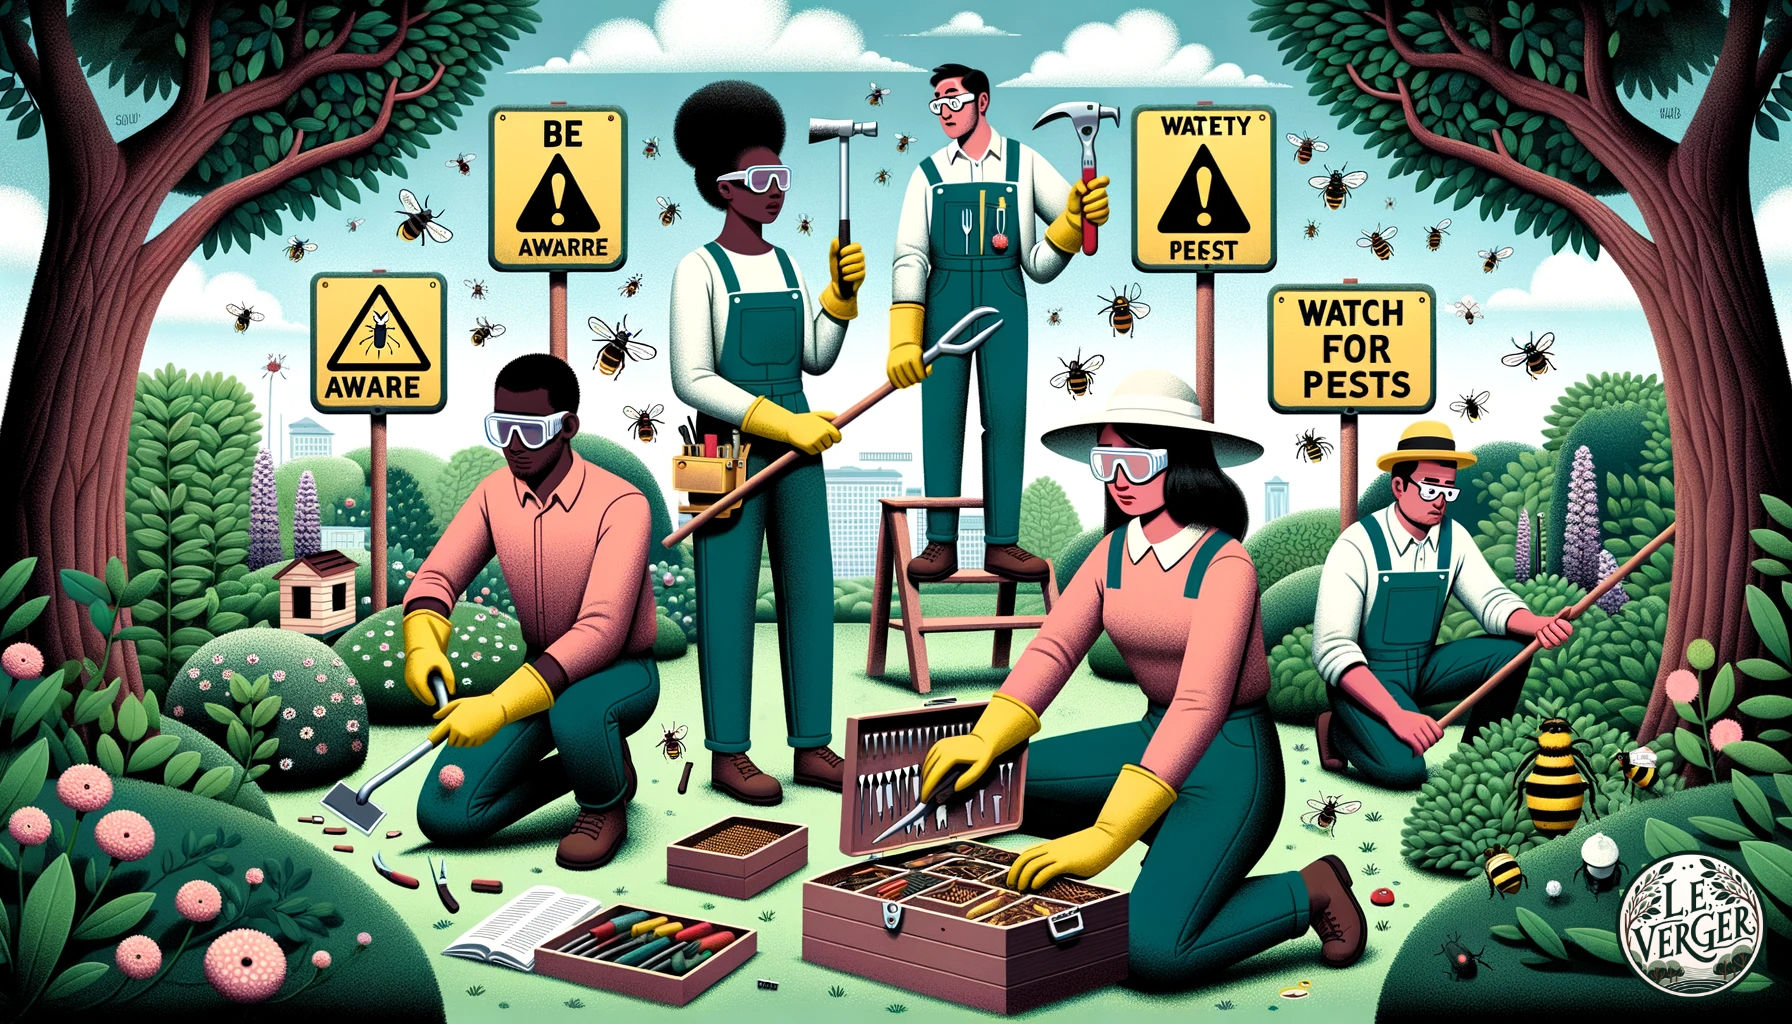 Illustration, wide aspect: A garden scene where a diverse group of gardeners are showcasing safety measures during pruning. On the left, a gardener of Hispanic descent is wearing protective gloves, safety goggles, and a hat. In the centre, a woman of African descent is choosing the proper tool from a toolbox, ensuring each tool's sharpness and integrity. On the right, a man of Asian descent is cautiously pruning near a beehive, indicating awareness of surroundings. Hovering above are signs saying 'Be Aware', 'Safety First', and 'Watch for Pests', with illustrations of insects.